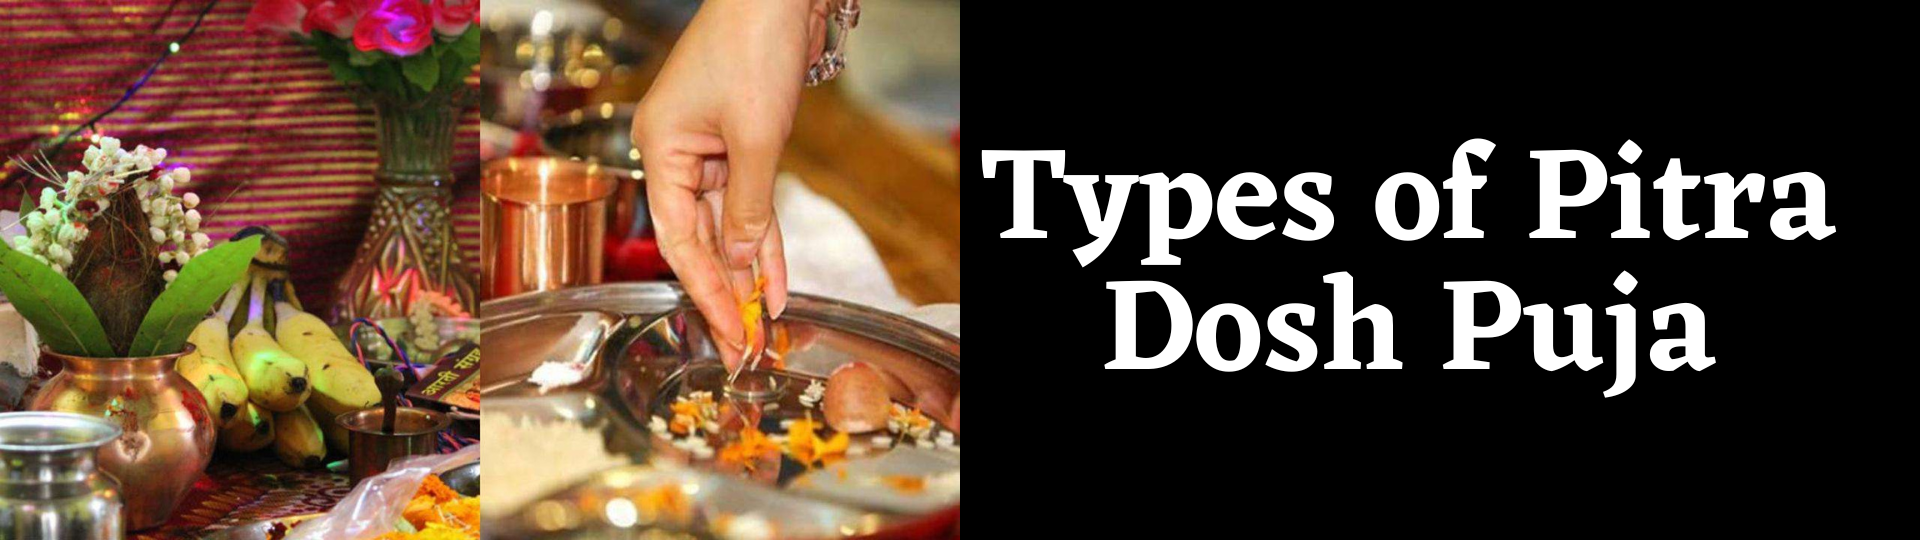 types of pitra dosh puja<br />
